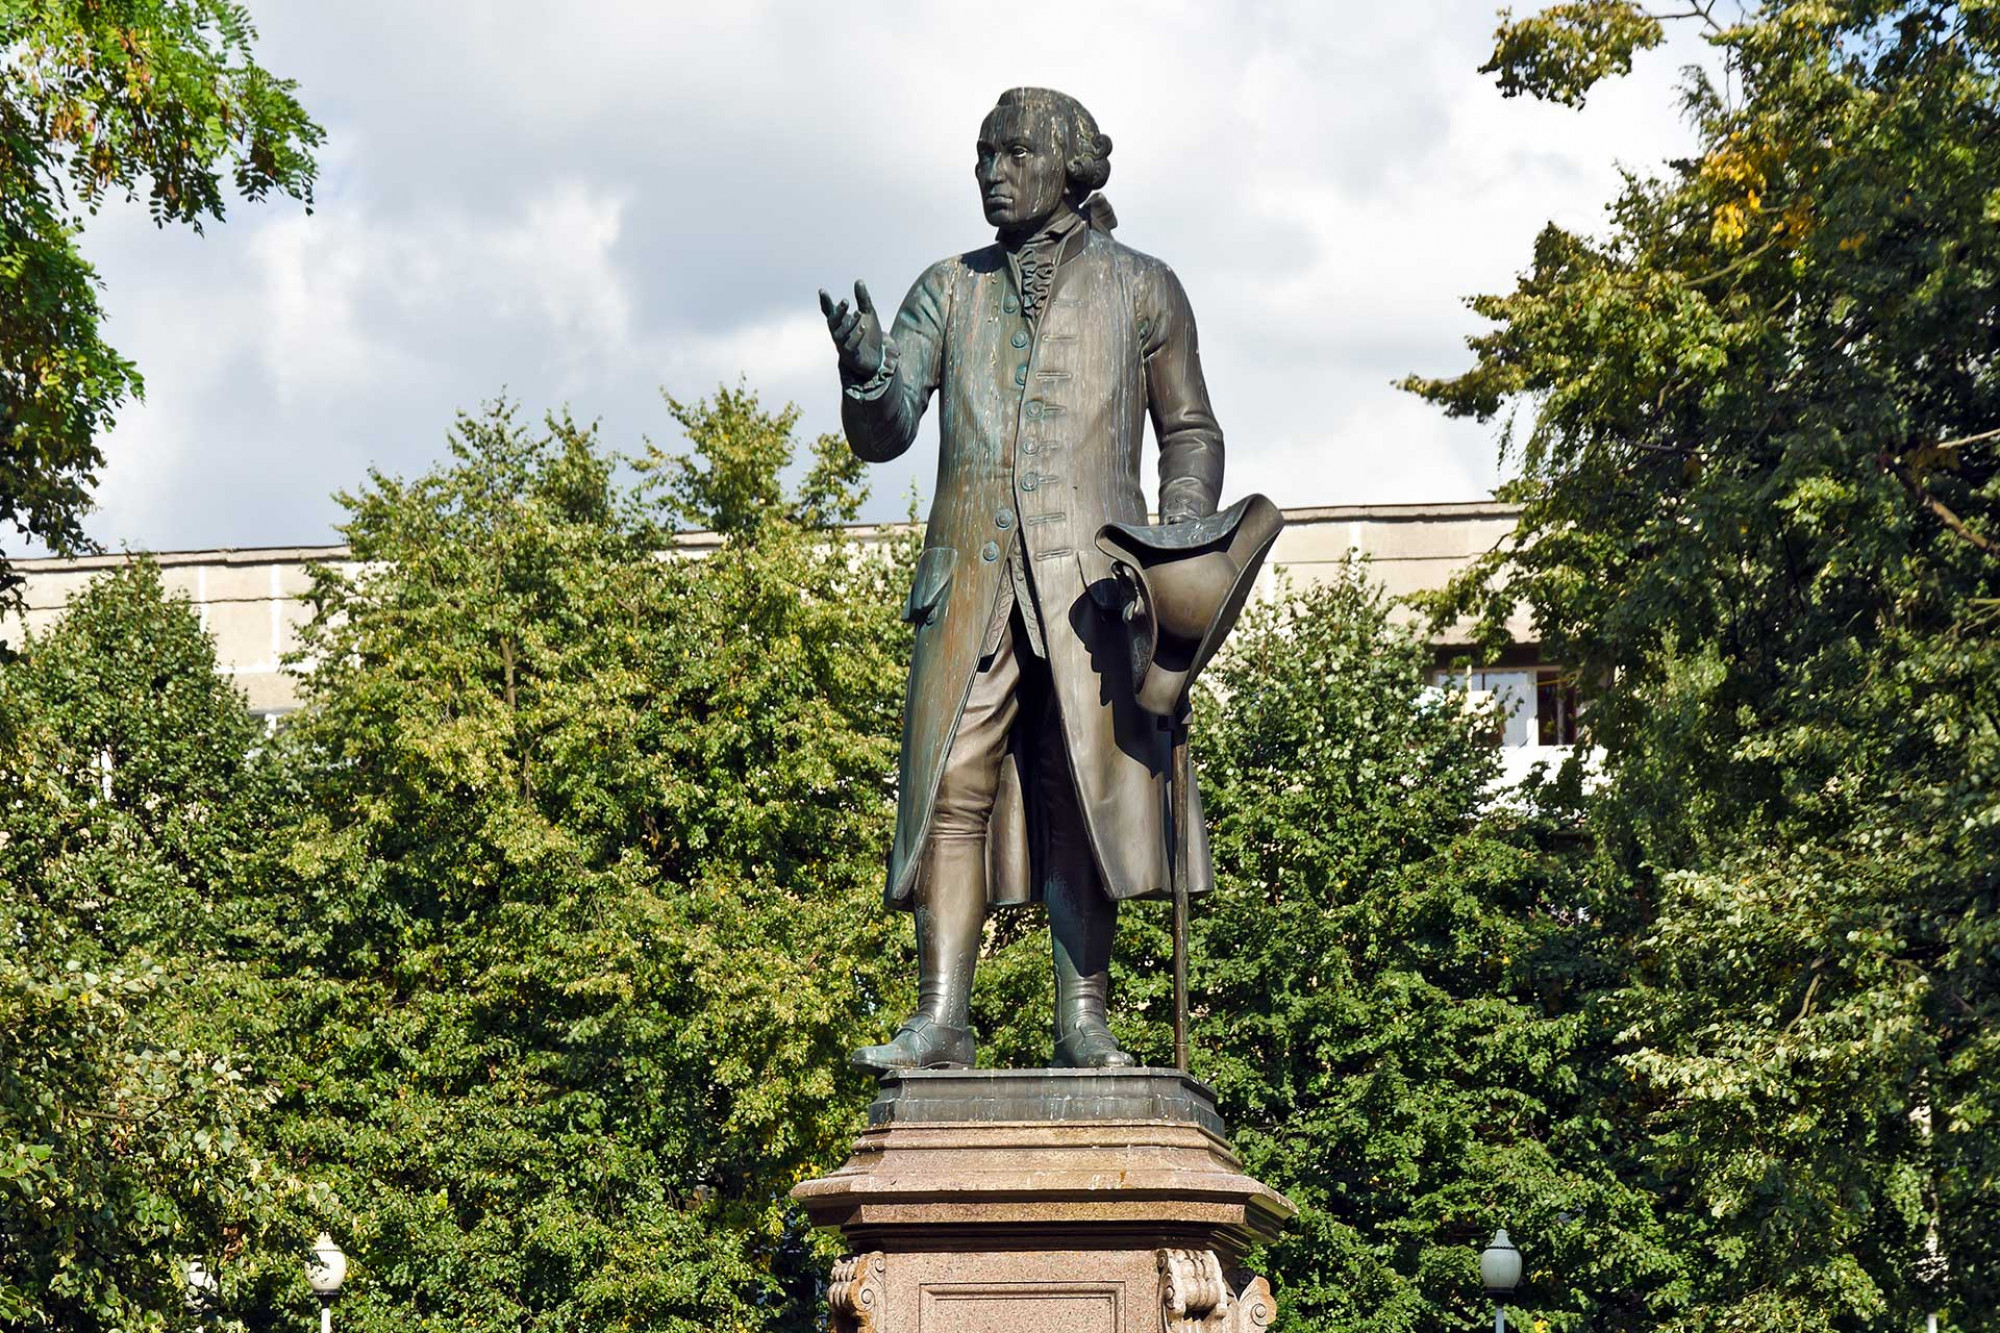 Statue of Kant, against a background of trees